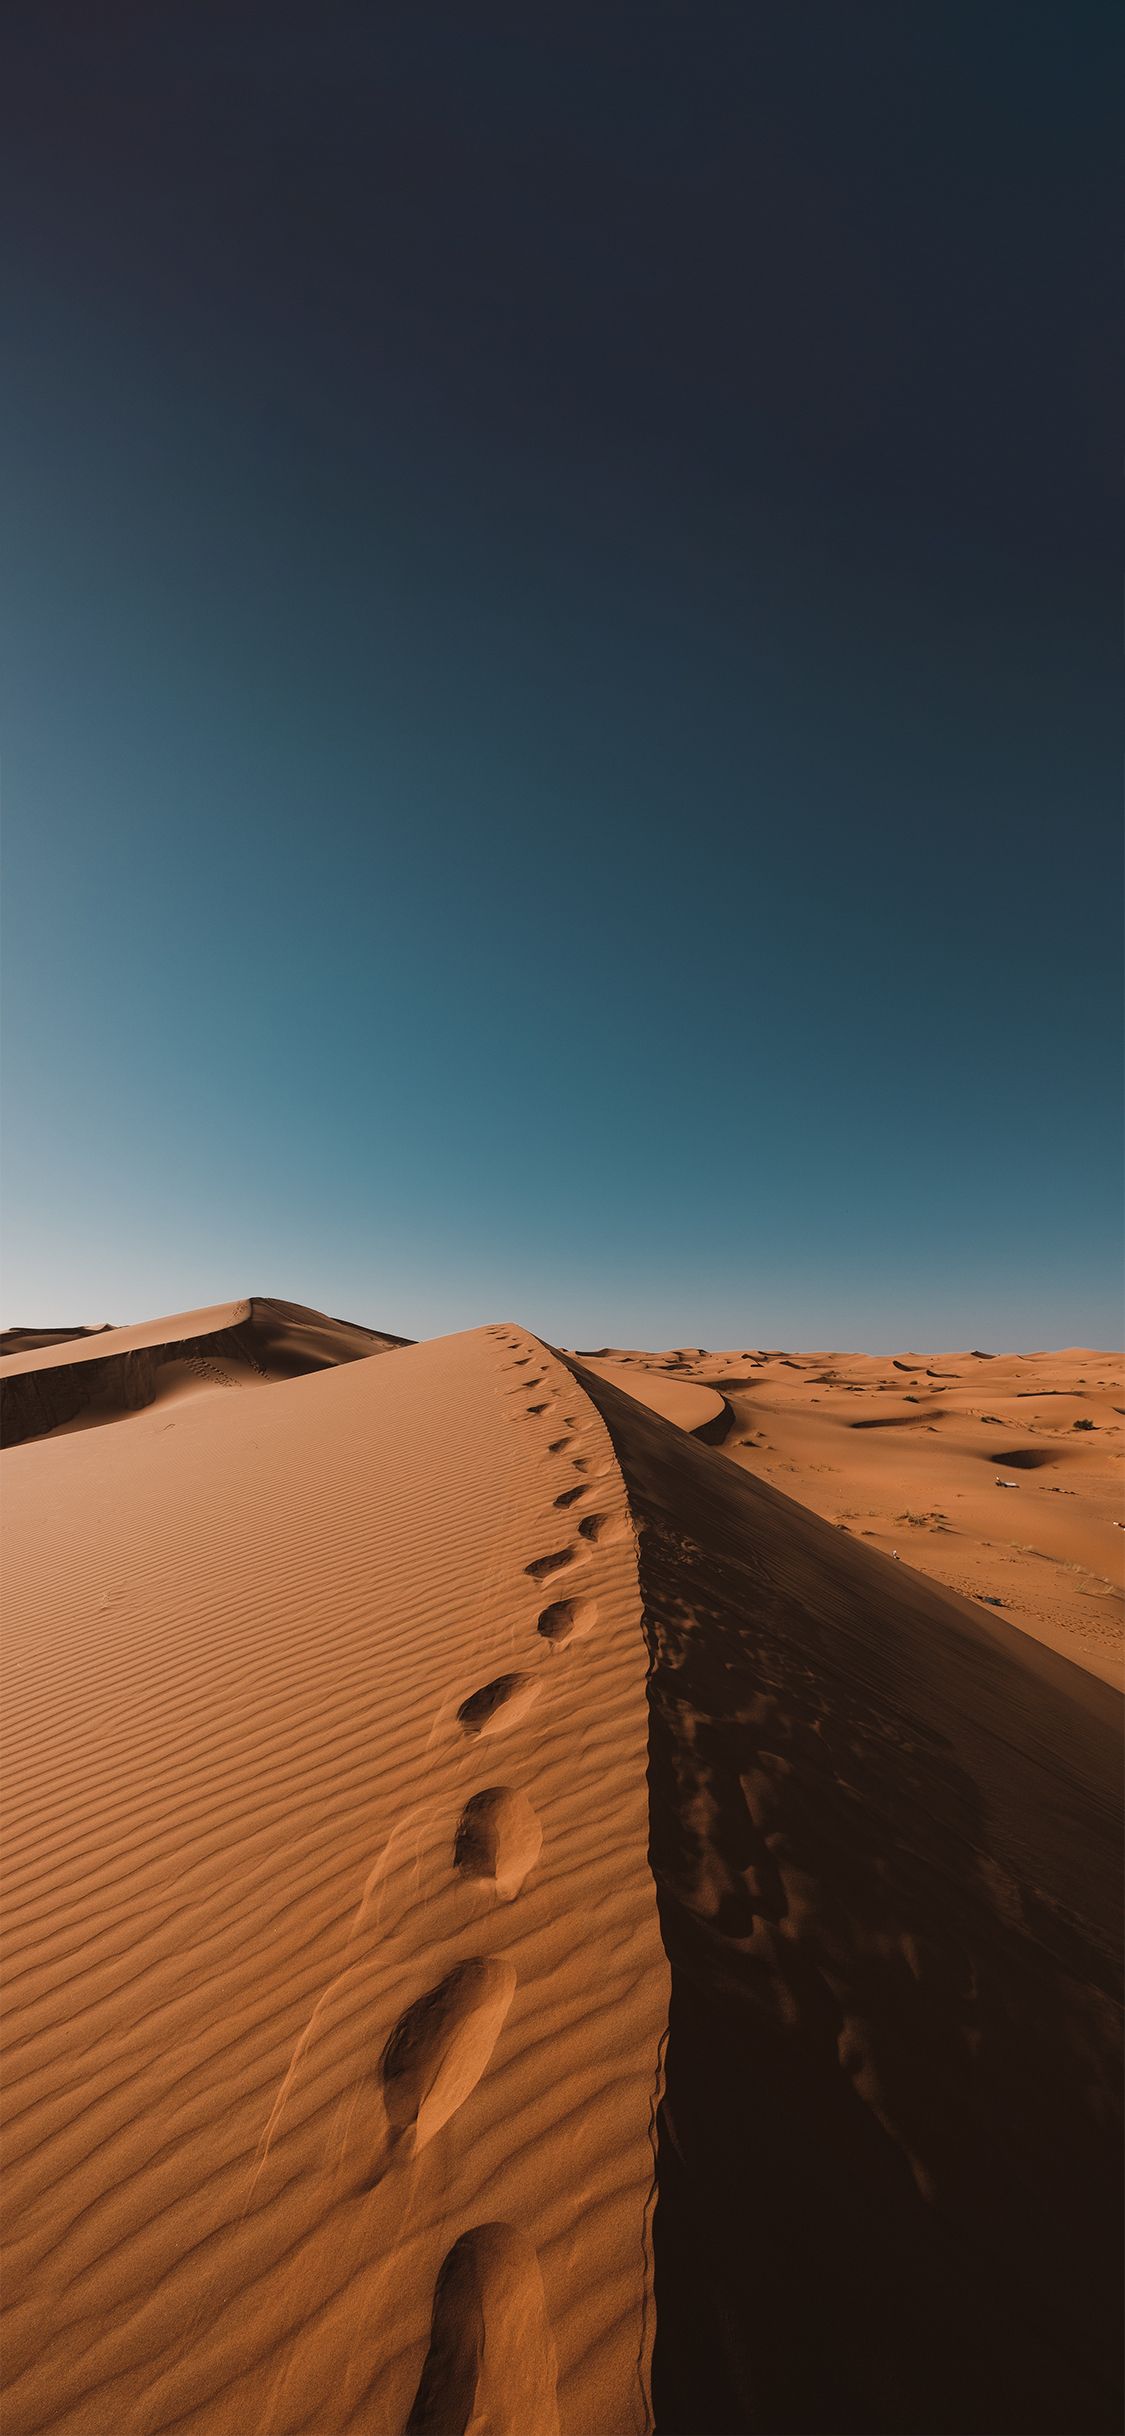 A sand dune in the desert with footprints in the sand - Desert